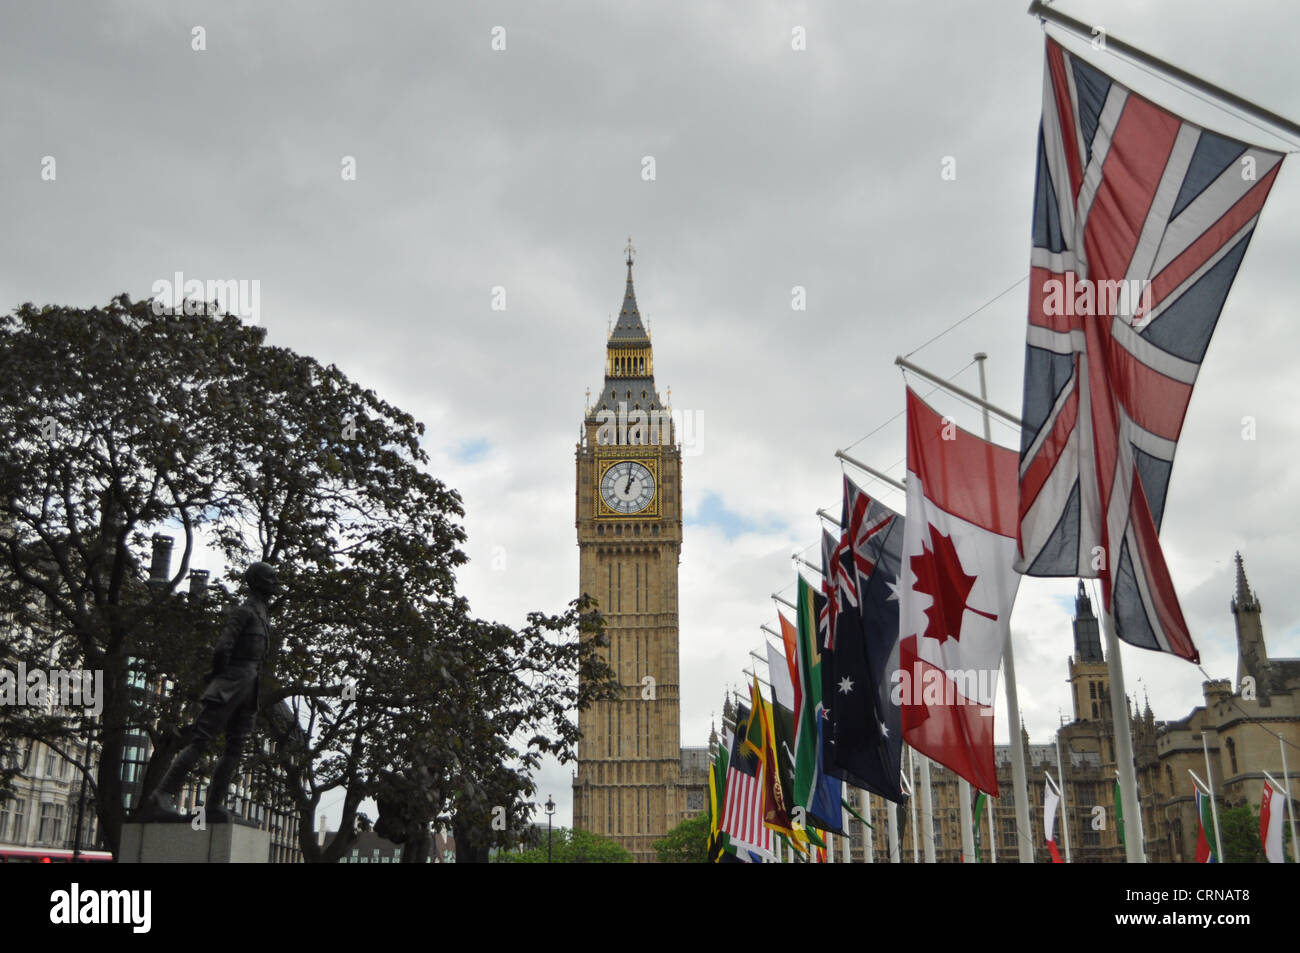 Big ben, westminster, house of parliament, flags Stock Photo